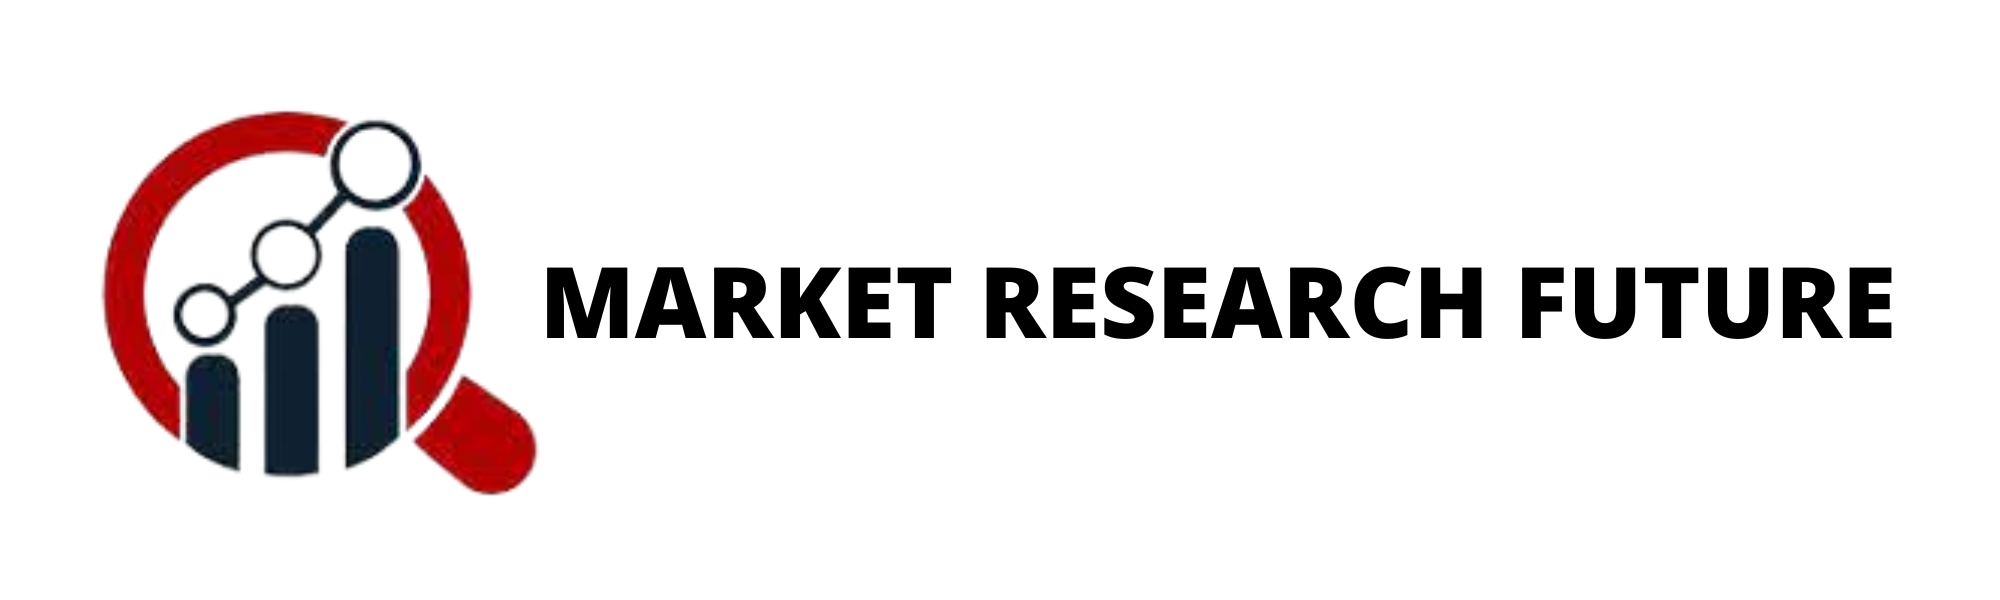 Reactive Dyes Market Demand In-Depth Analysis Globally By Top Key...